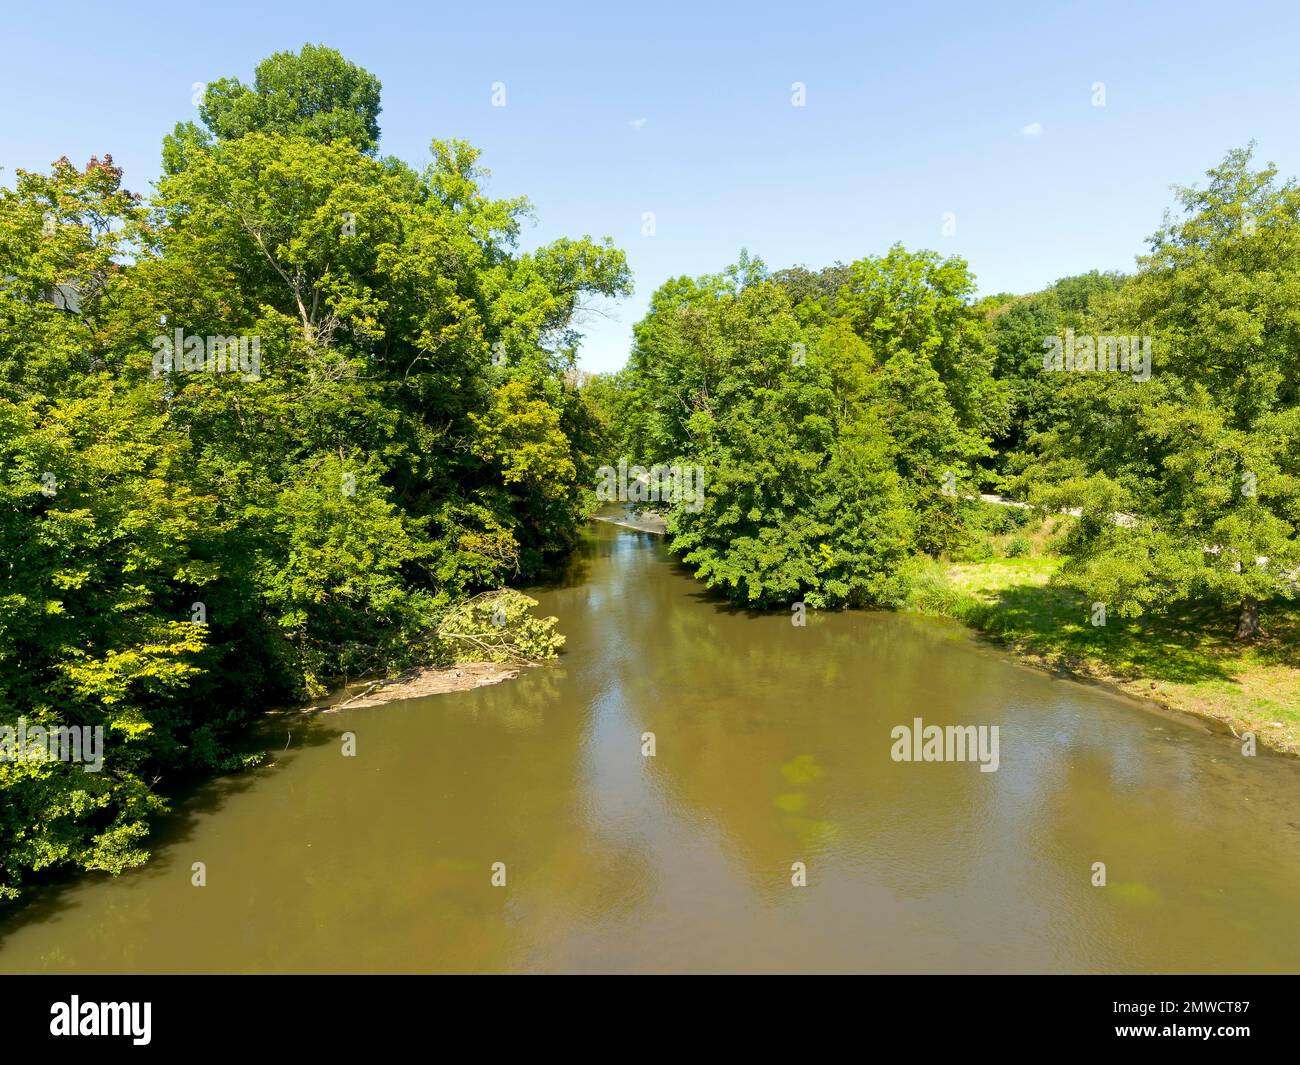 River Ilm with riparian vegetation, view from the bridge behind the city palace, Weimar, Thuringia, Germany Stock Photo